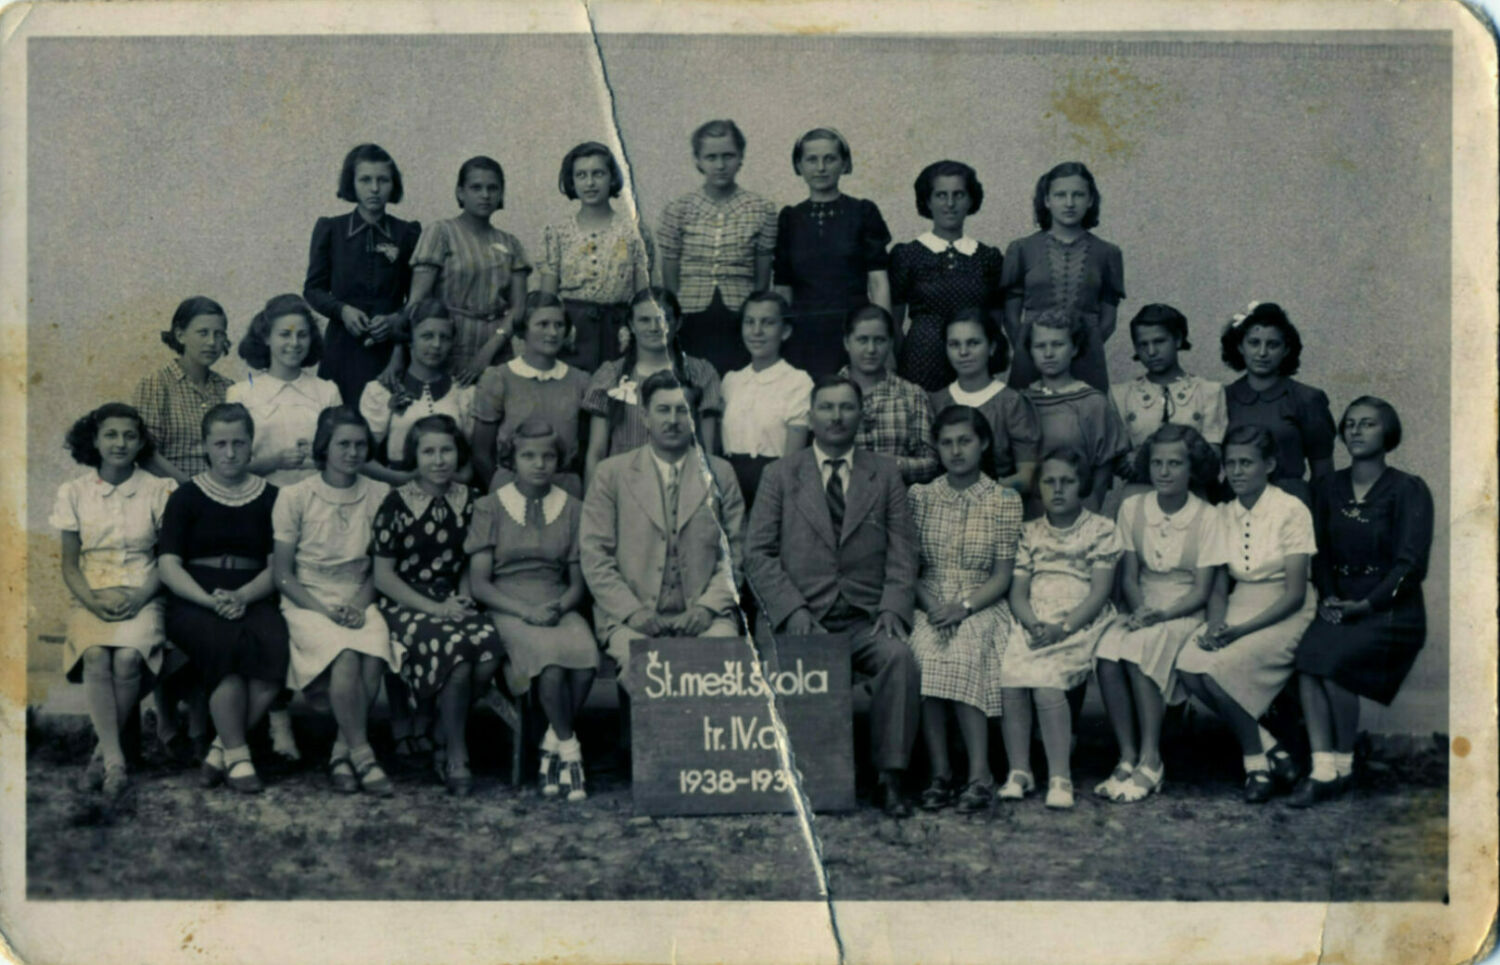 Class photo of girls with two teachers sitting in the front and center.